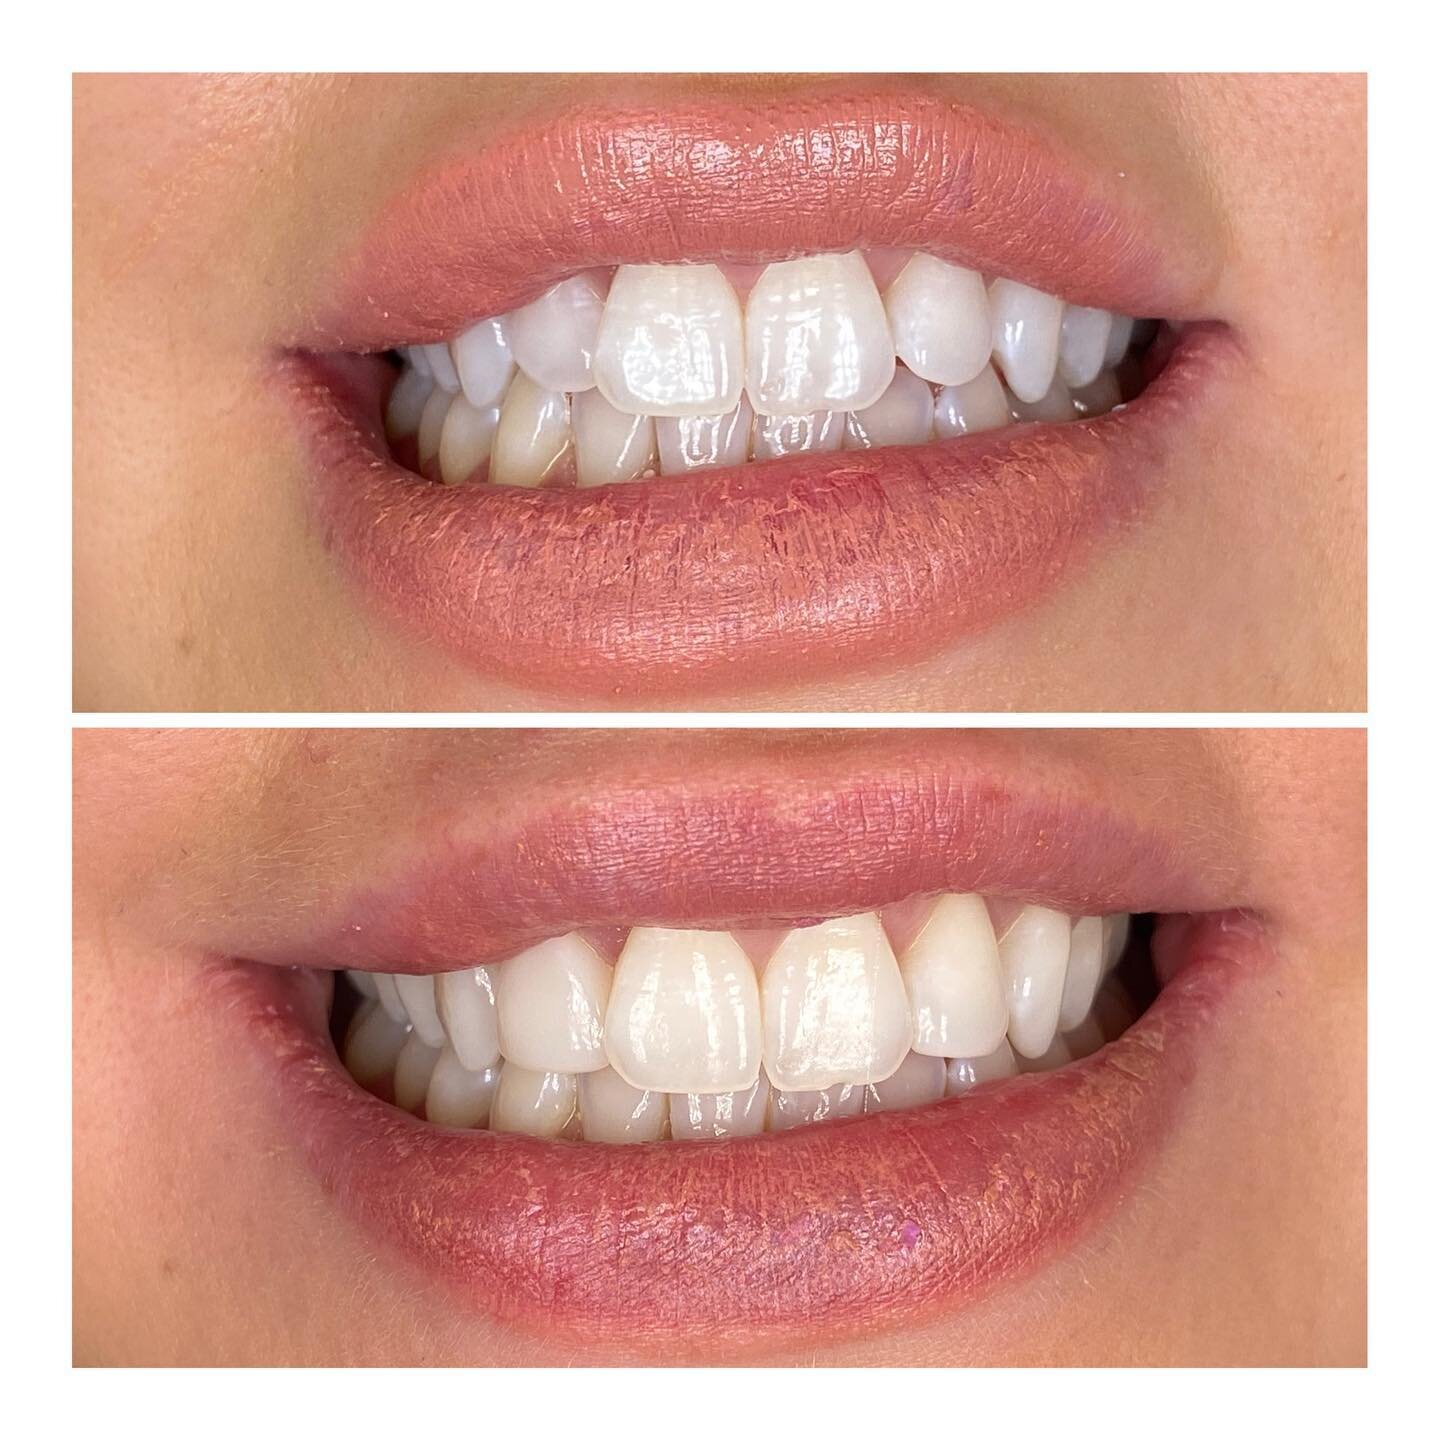 Some little tweaks with composite bonding on the lateral incisors to even out the appearance and mask a slightly rotated tooth. This gorgeous patient was delighted with the results and so was her dentist Dr Kegan Lewis✨✨No injections, no drilling of 